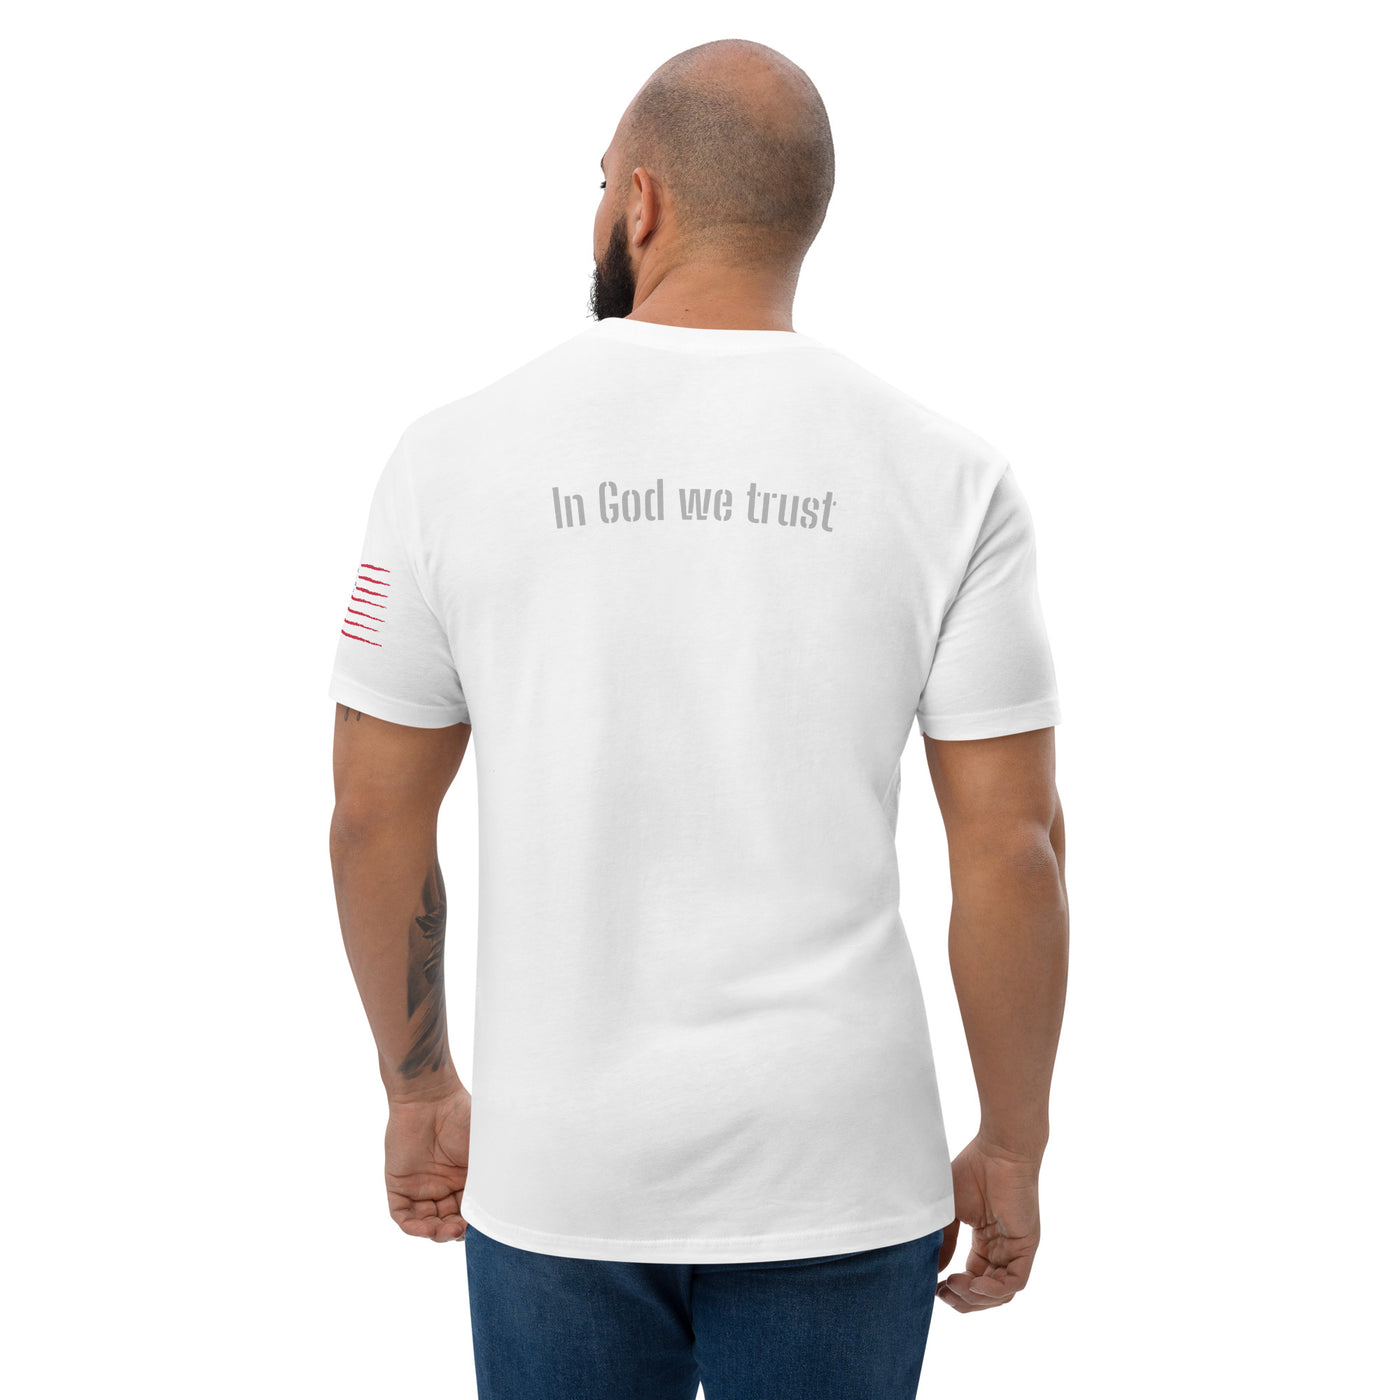 Men's Fitted T-shirt